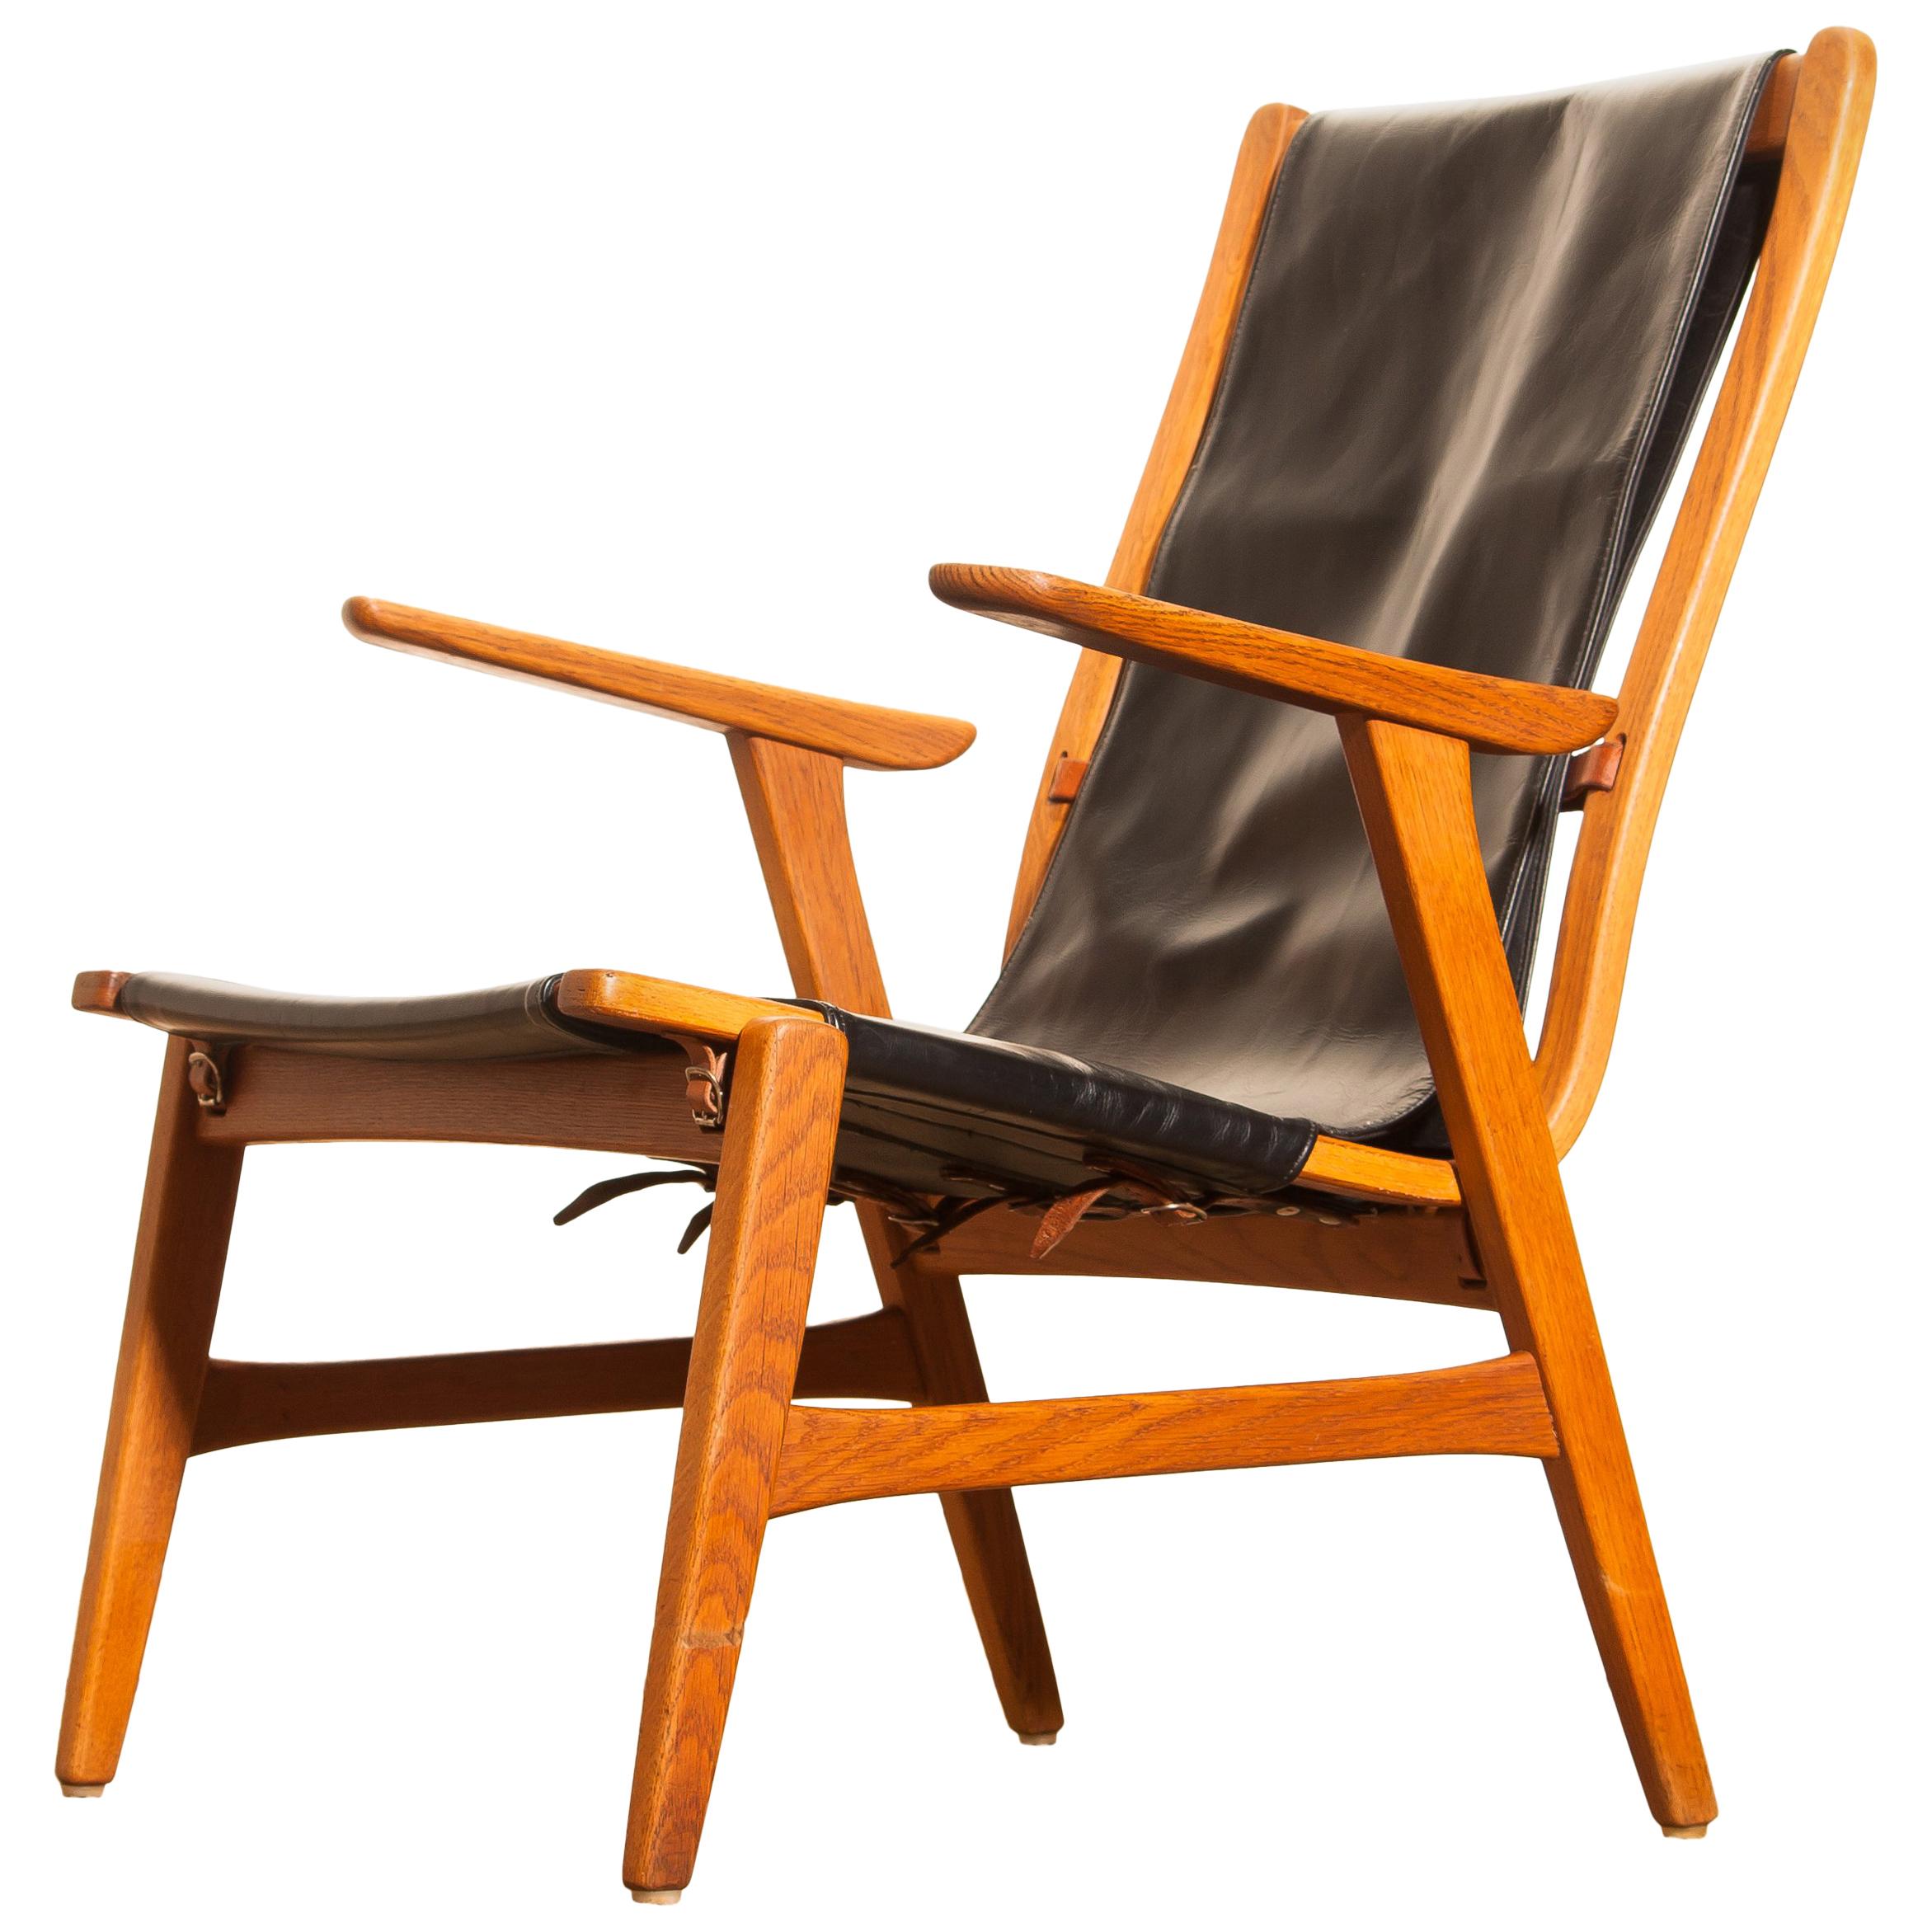 Mid-20th Century 1950s, Oak and Leatherette Hunting Chair 'Ulrika' by Östen Kristiansson